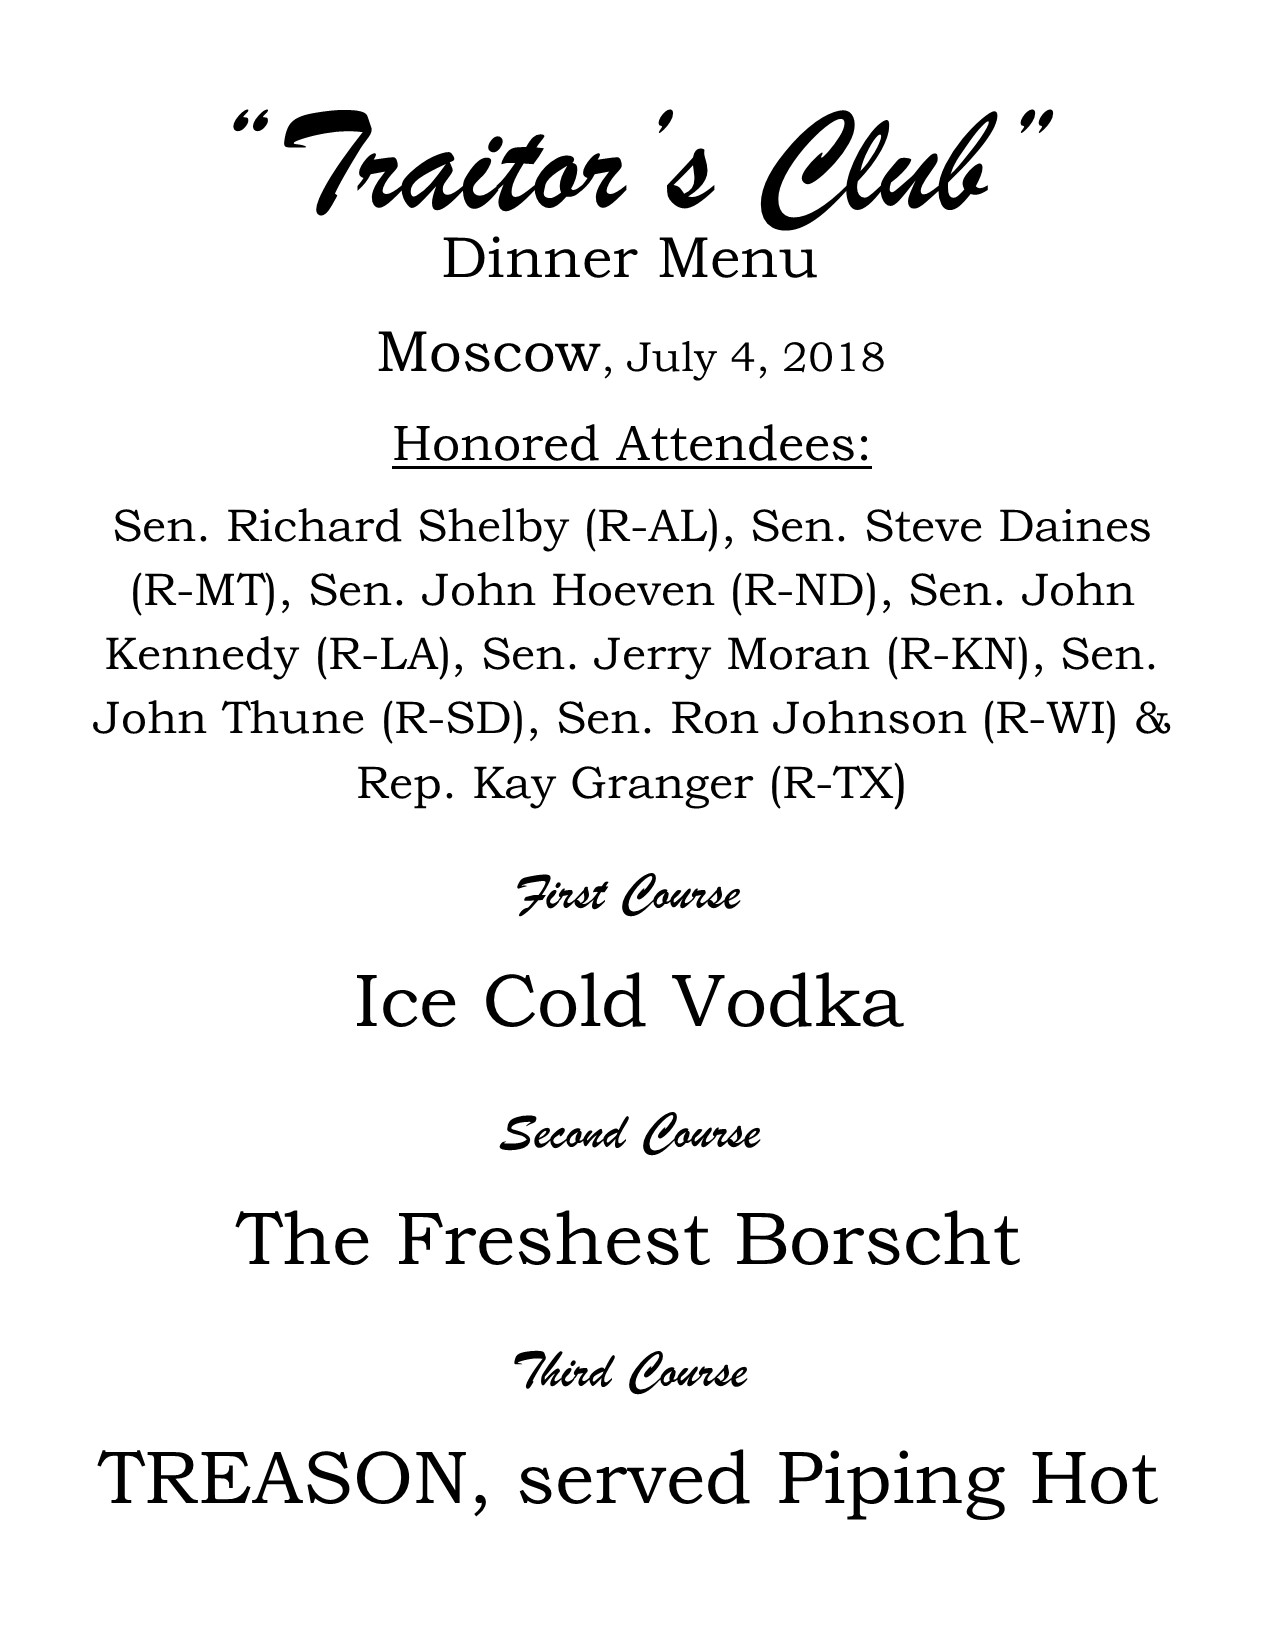 Breaking News: Moscow July 4, 2018 “Traitor’s Club” Dinner Menu Revealed — Treason WAS On The Menu!